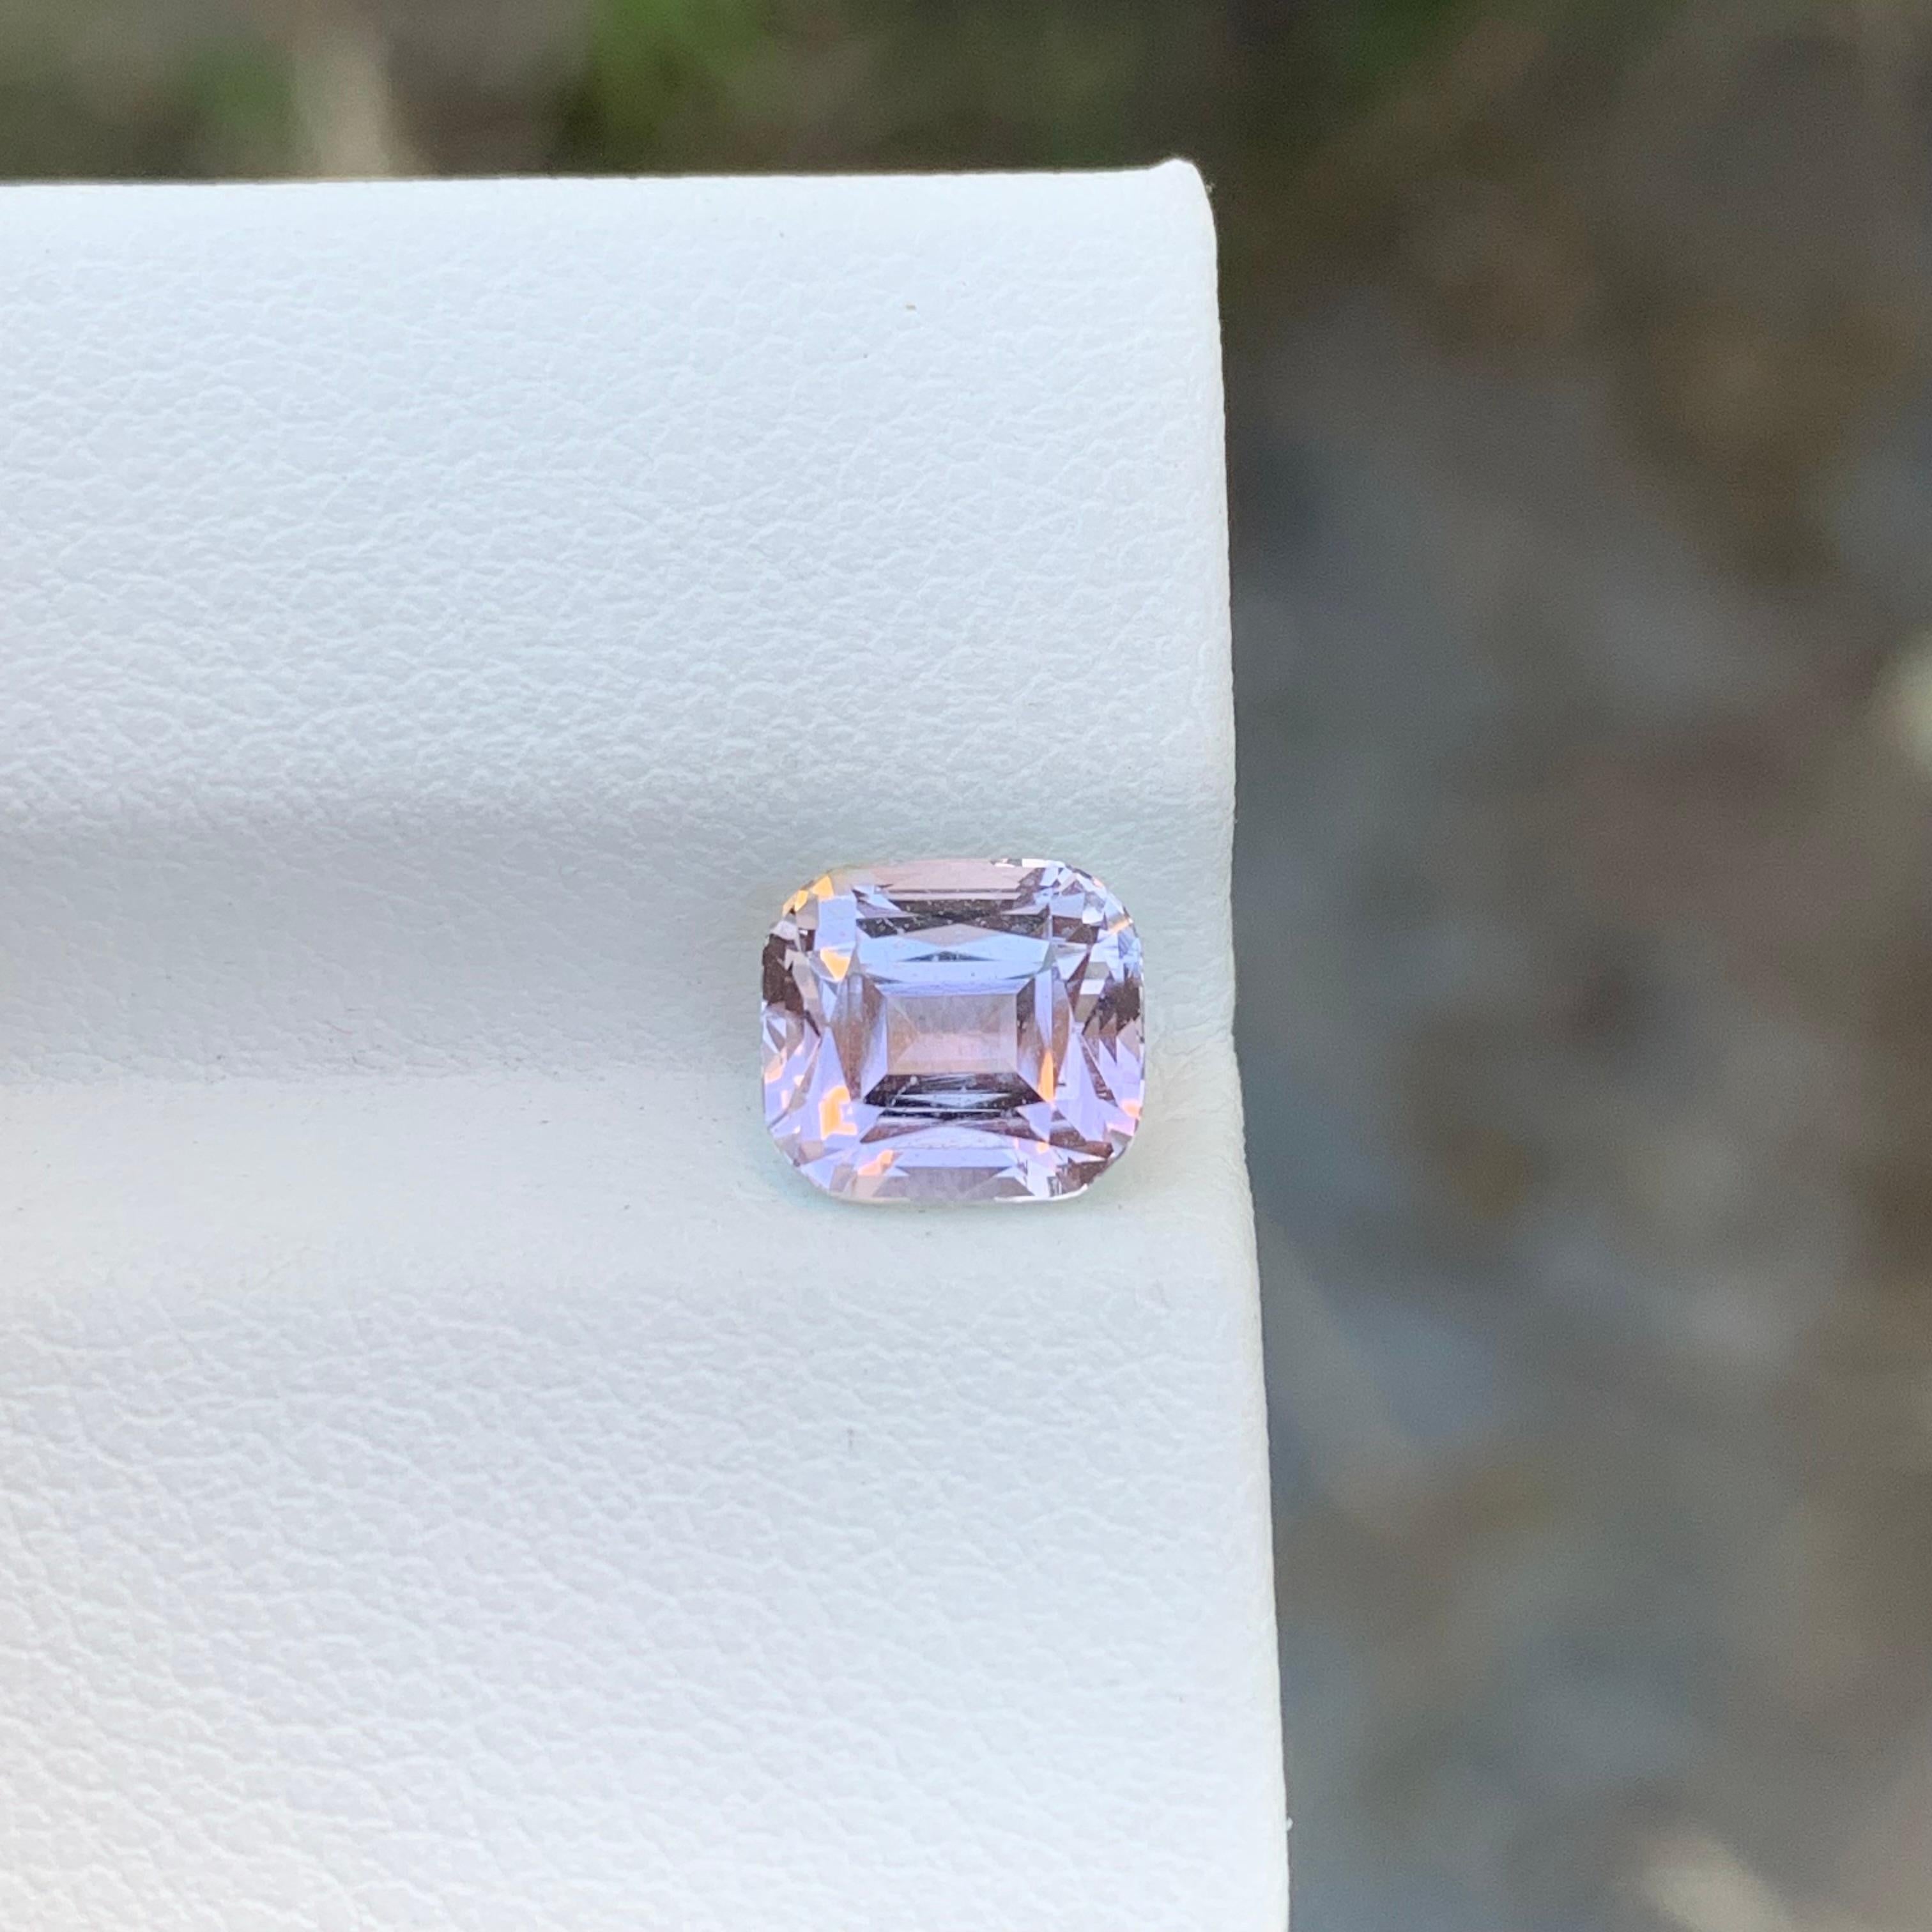 Loose Light Pink  Tourmaline

Weight: 1.80 Carats
Dimension: 7.1 x 6.3 x 5.2 Mm
Colour: Light Pink 
Origin: Afghanistan
Certificate: On Demand
Treatment: Non

Tourmaline is a captivating gemstone known for its remarkable variety of colors, making it